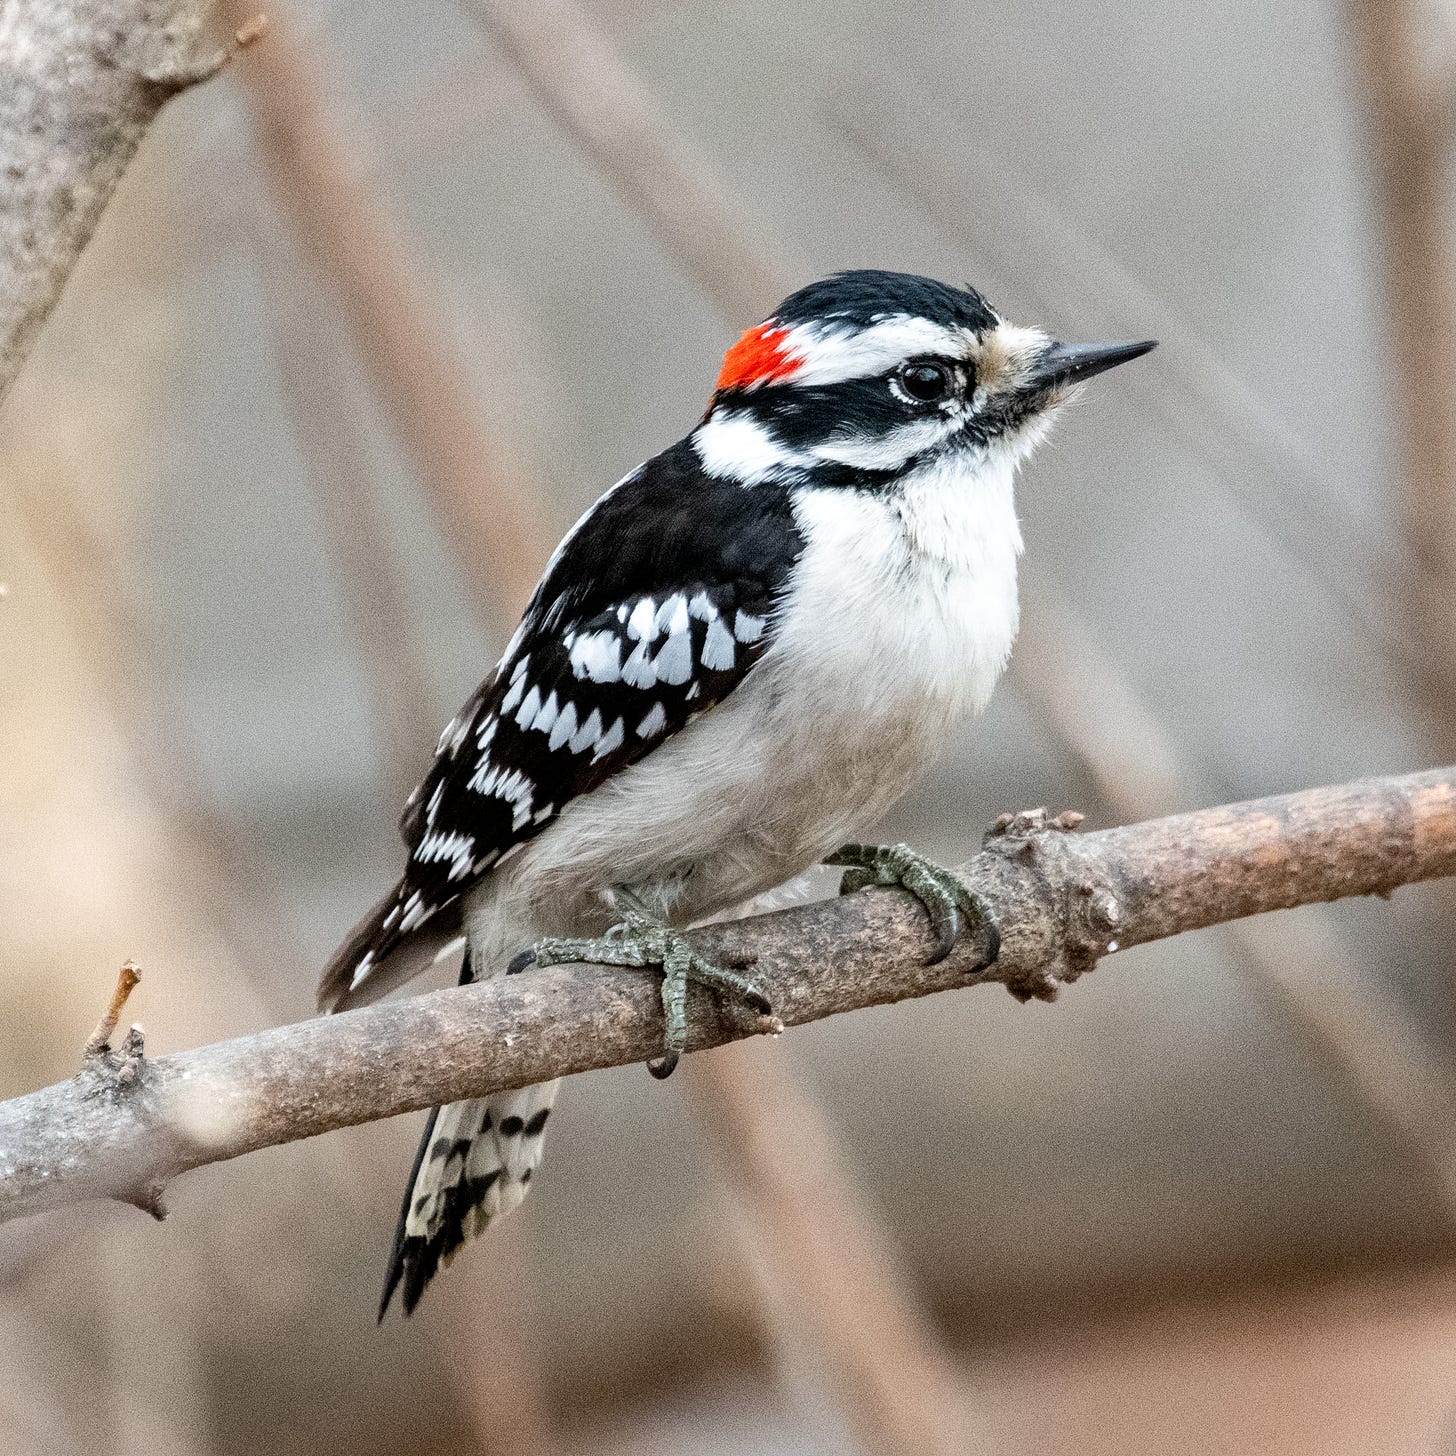 A downy woodpecker with the energy of an eager student